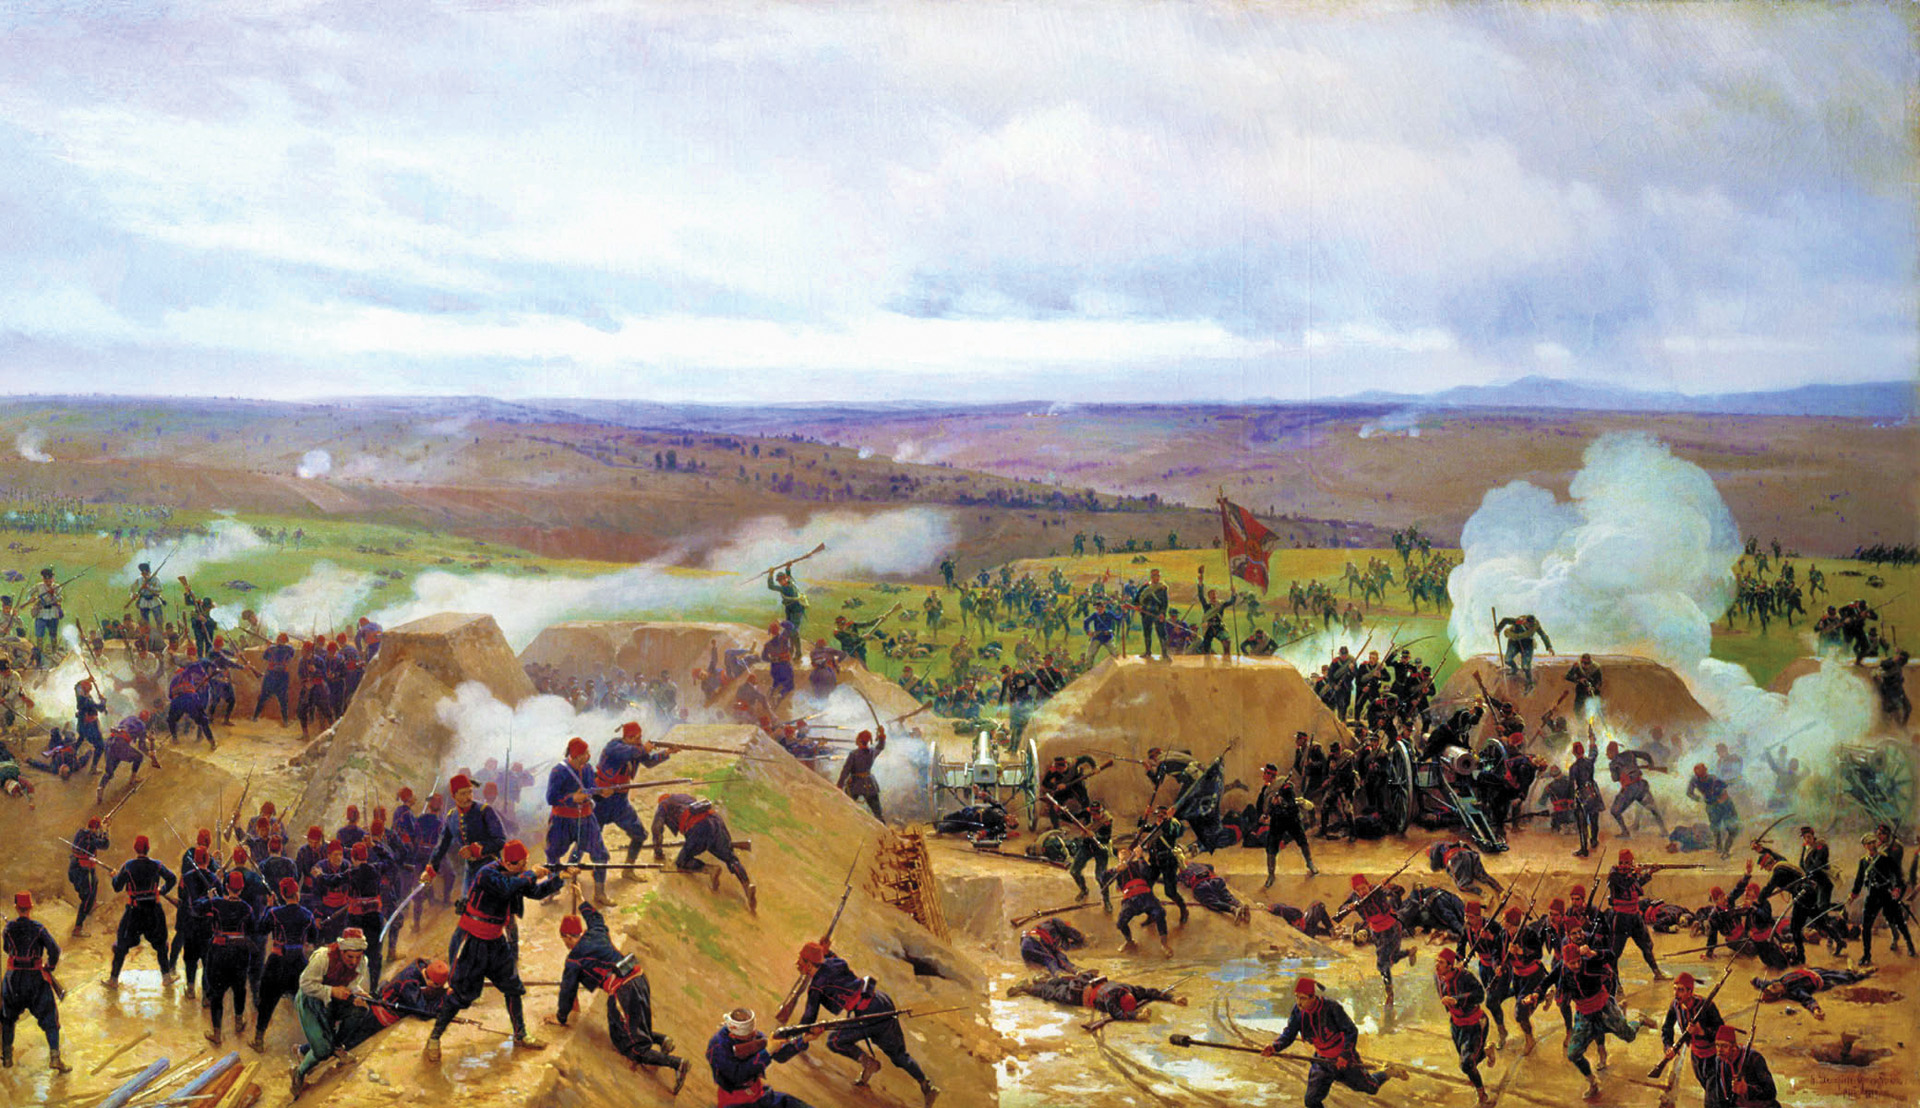 General Mikhail Skobelev led the Russians in a successful assault on the Grivitsa redoubt during the Siege of Plevna in 1877. His men repulsed five furious counterattacks by the Turks.